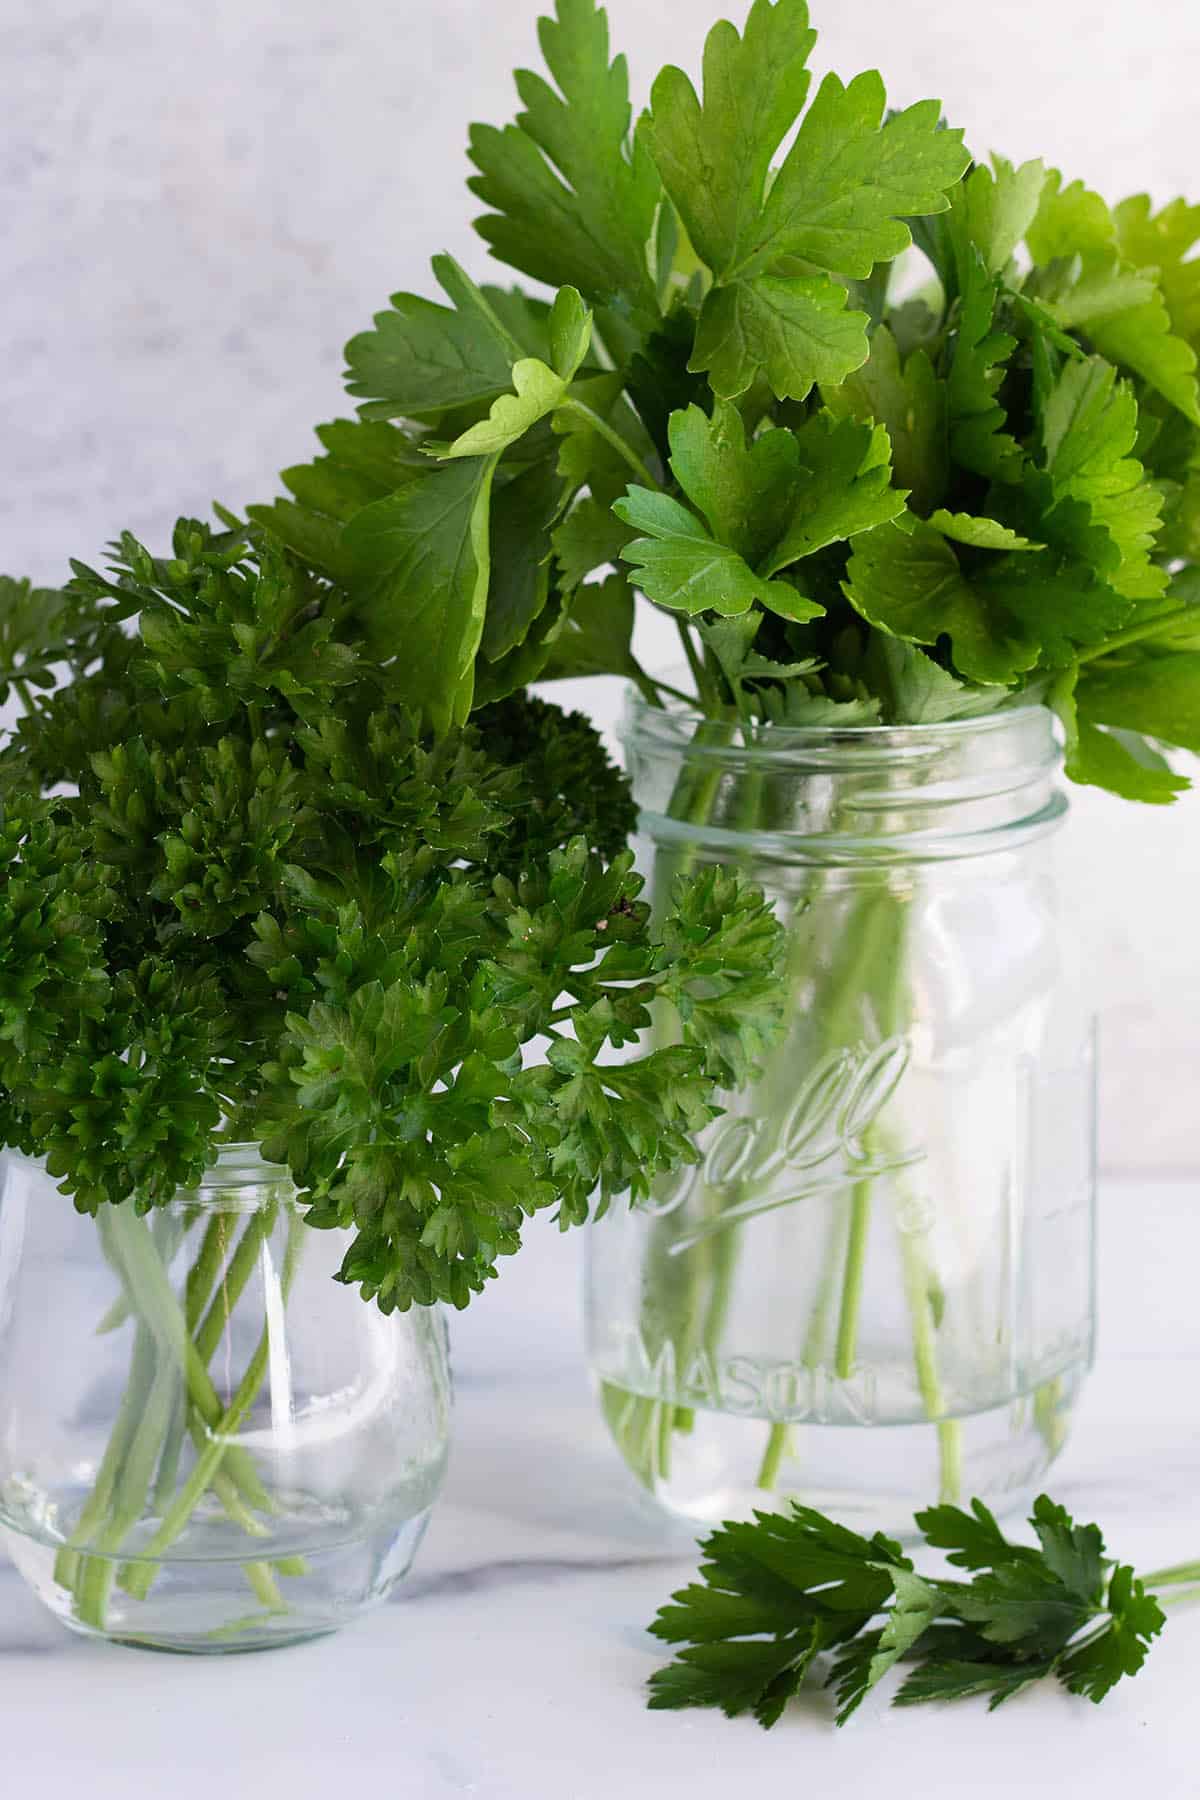 Two glass jars, one with flat leaf parsley and the other with curly leaf parsley.